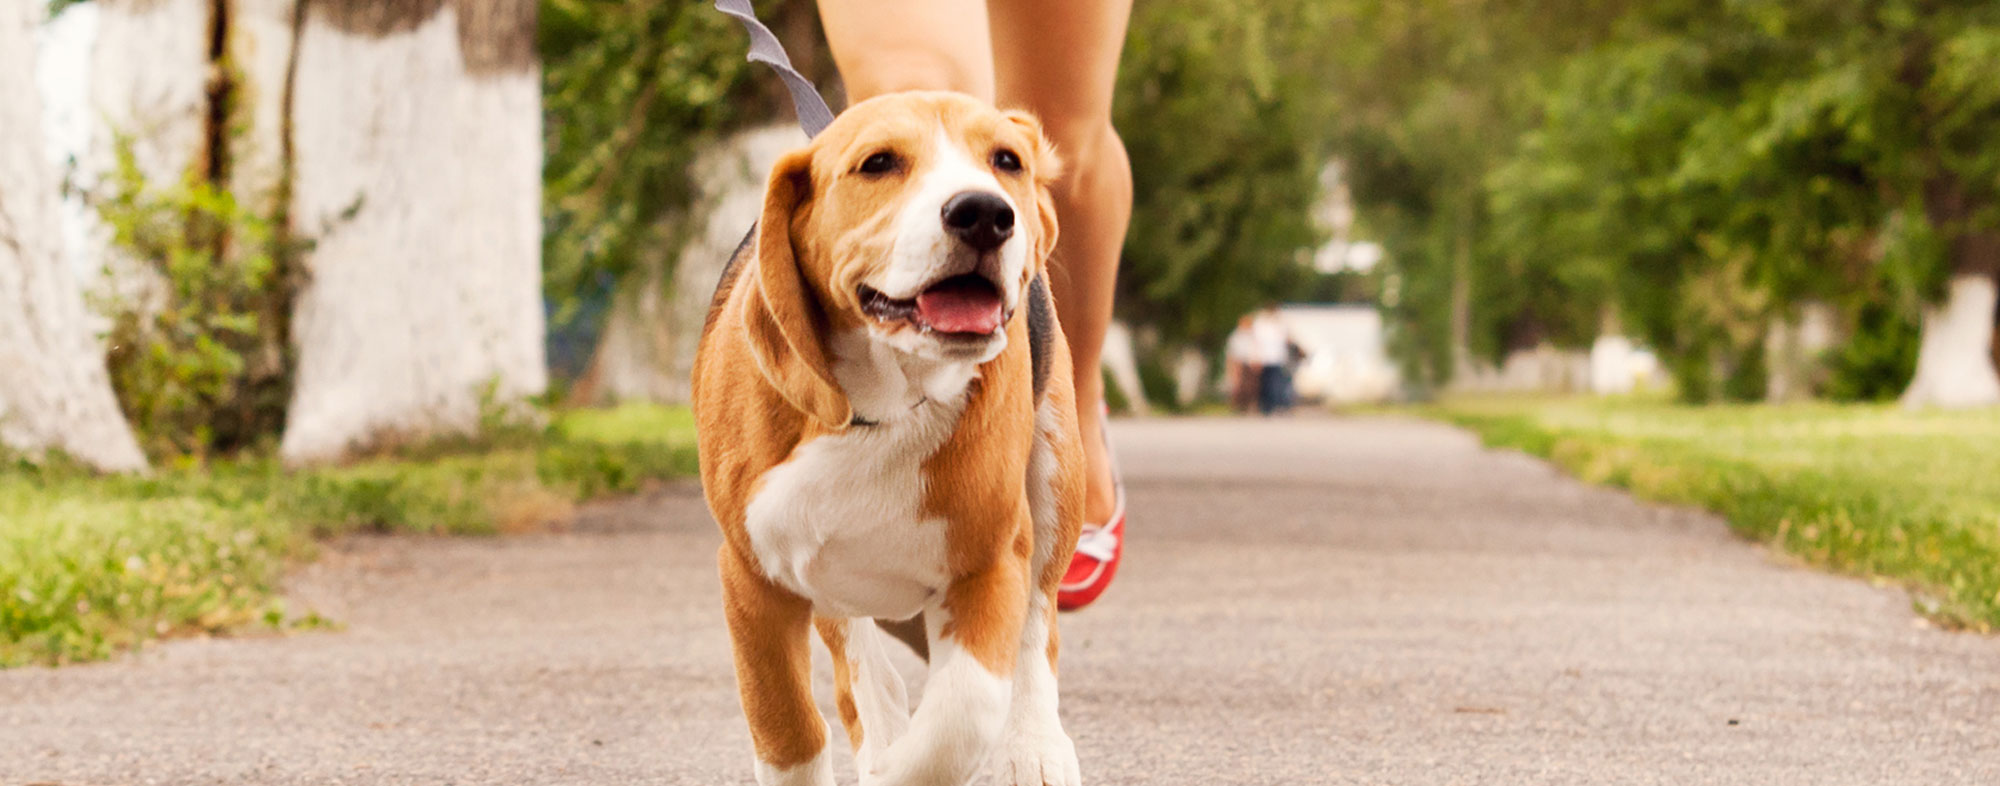 You can partake in fun activities with your dog, like jogging